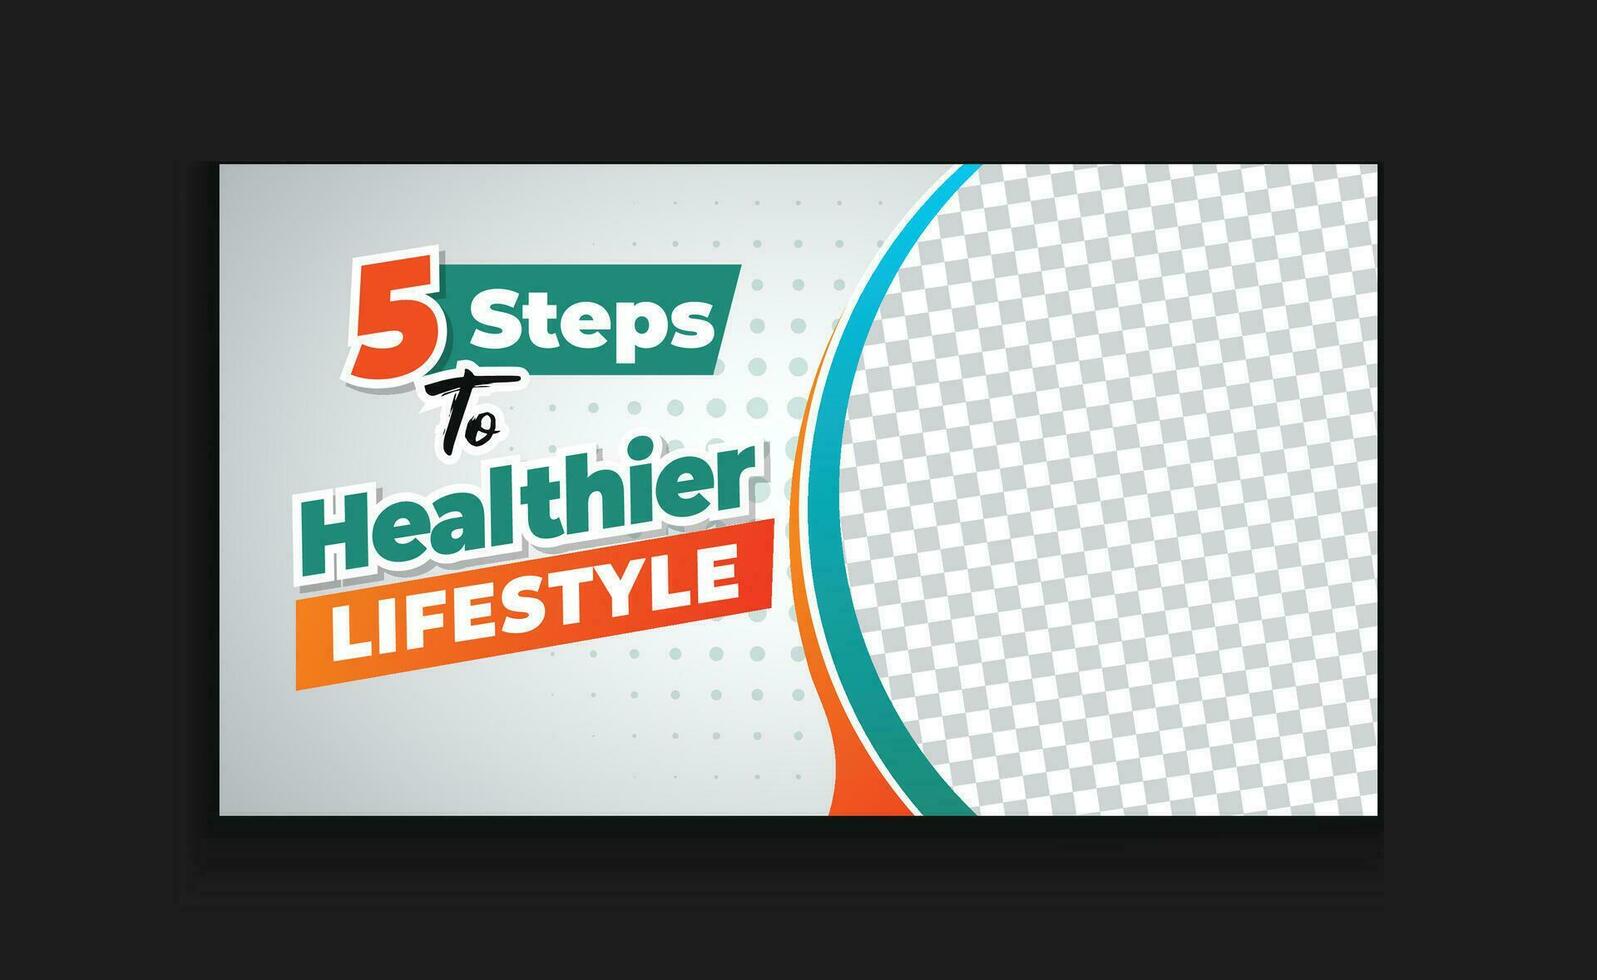 Healthy lifestyle and health tips online eye catching thumbnail Attractive video template Medical healthcare editable banner Vector design